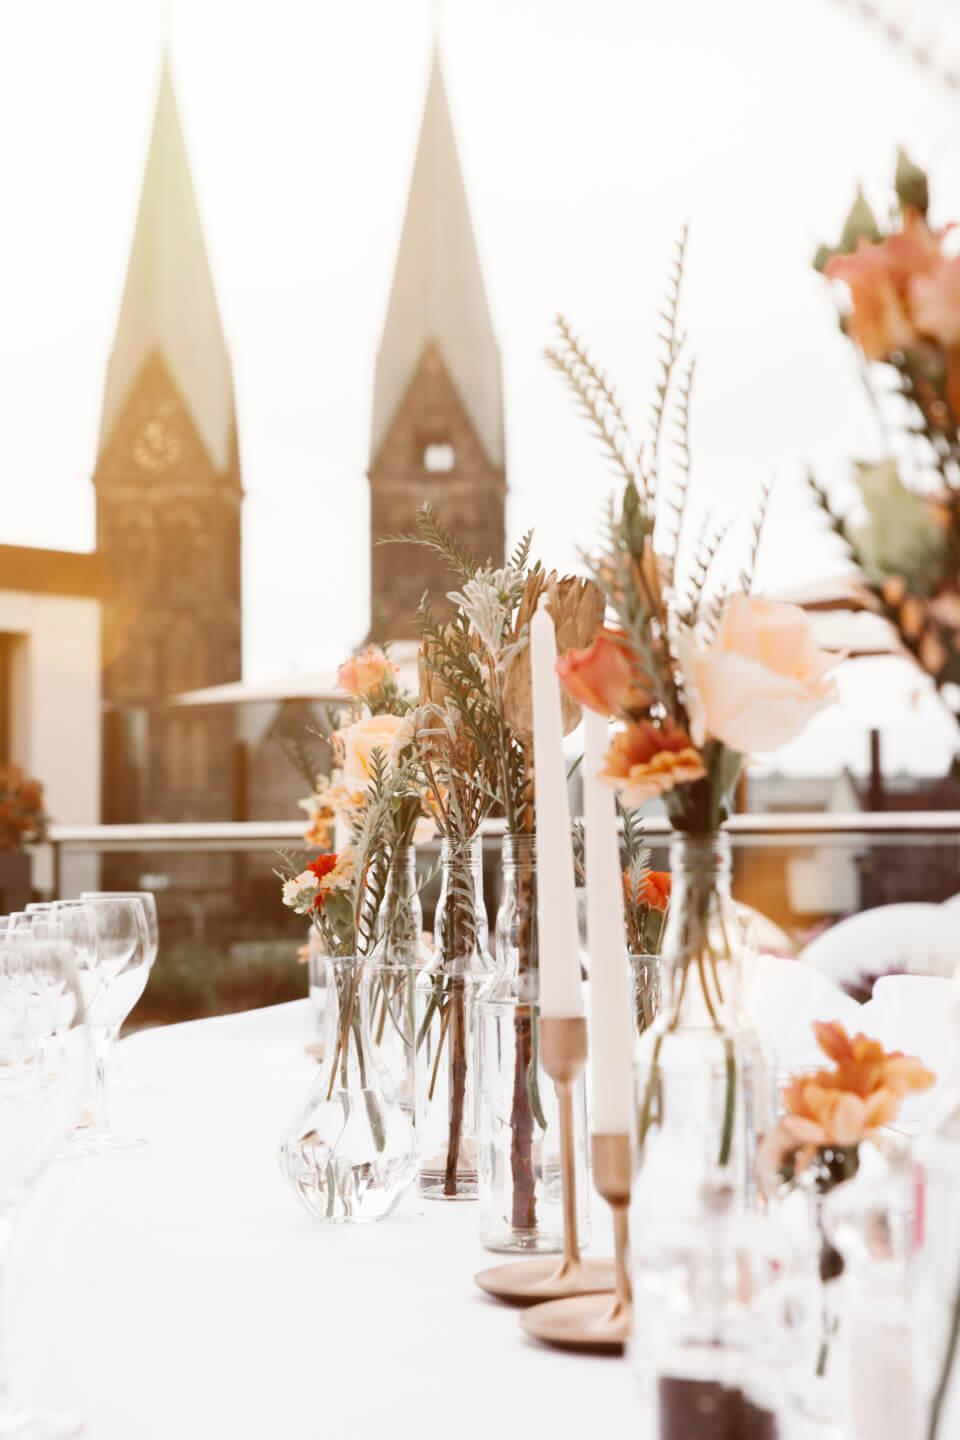 summery weddingdecoration with a view to the St. Petri church